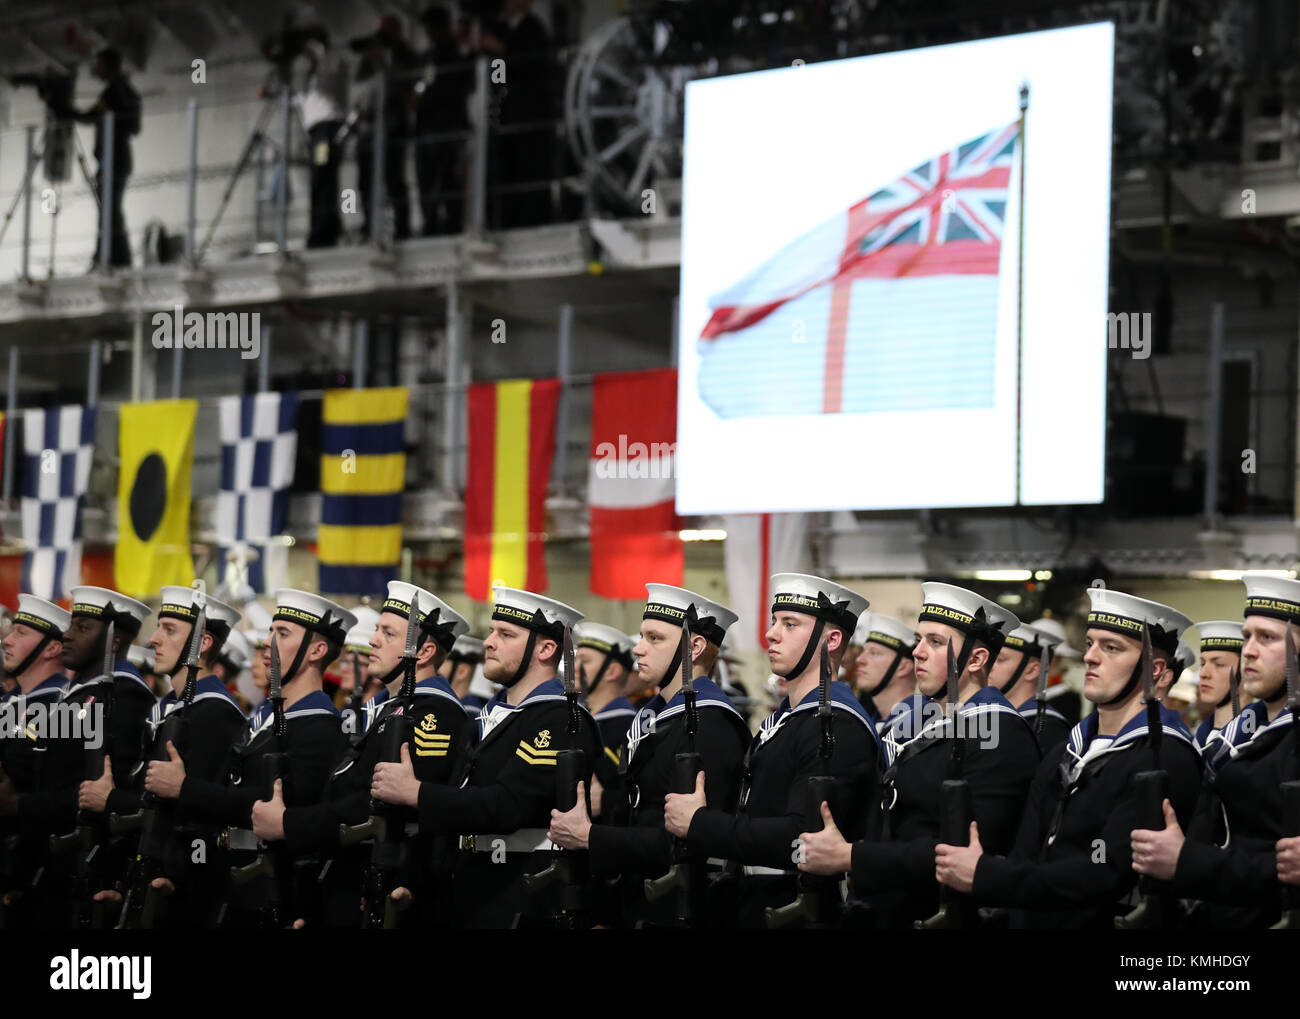 Royal Navy ratings in front a screen showing the White Ensign being hoisted, in the hanger of HMS Queen Elizabeth during her commissioning ceremony in Portsmouth. Stock Photo